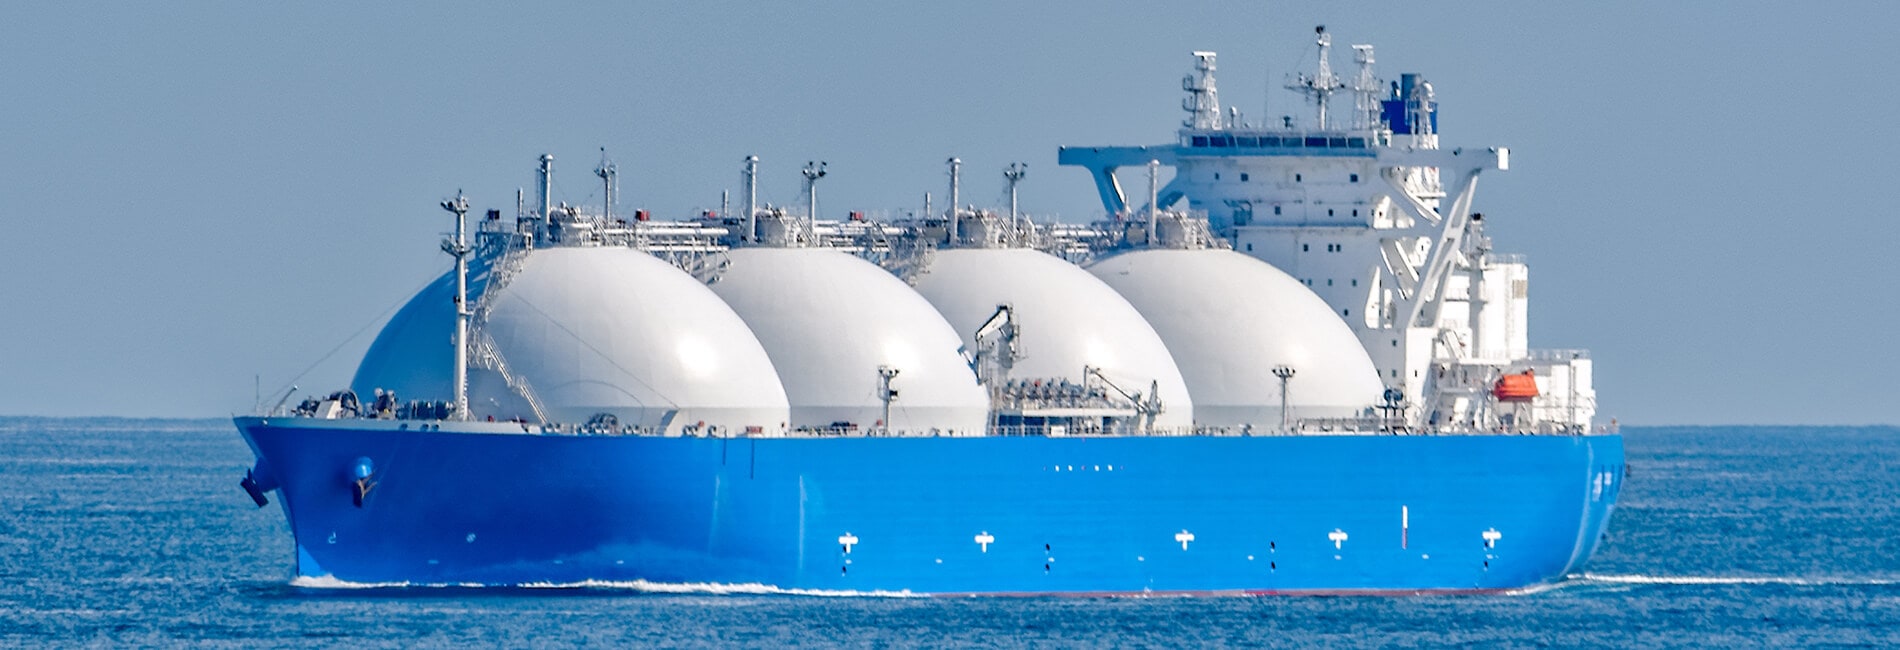 Ship Financing - A perfect example of an well kempt LNG Ship (Liquid Natural Gas) in mid-ocean